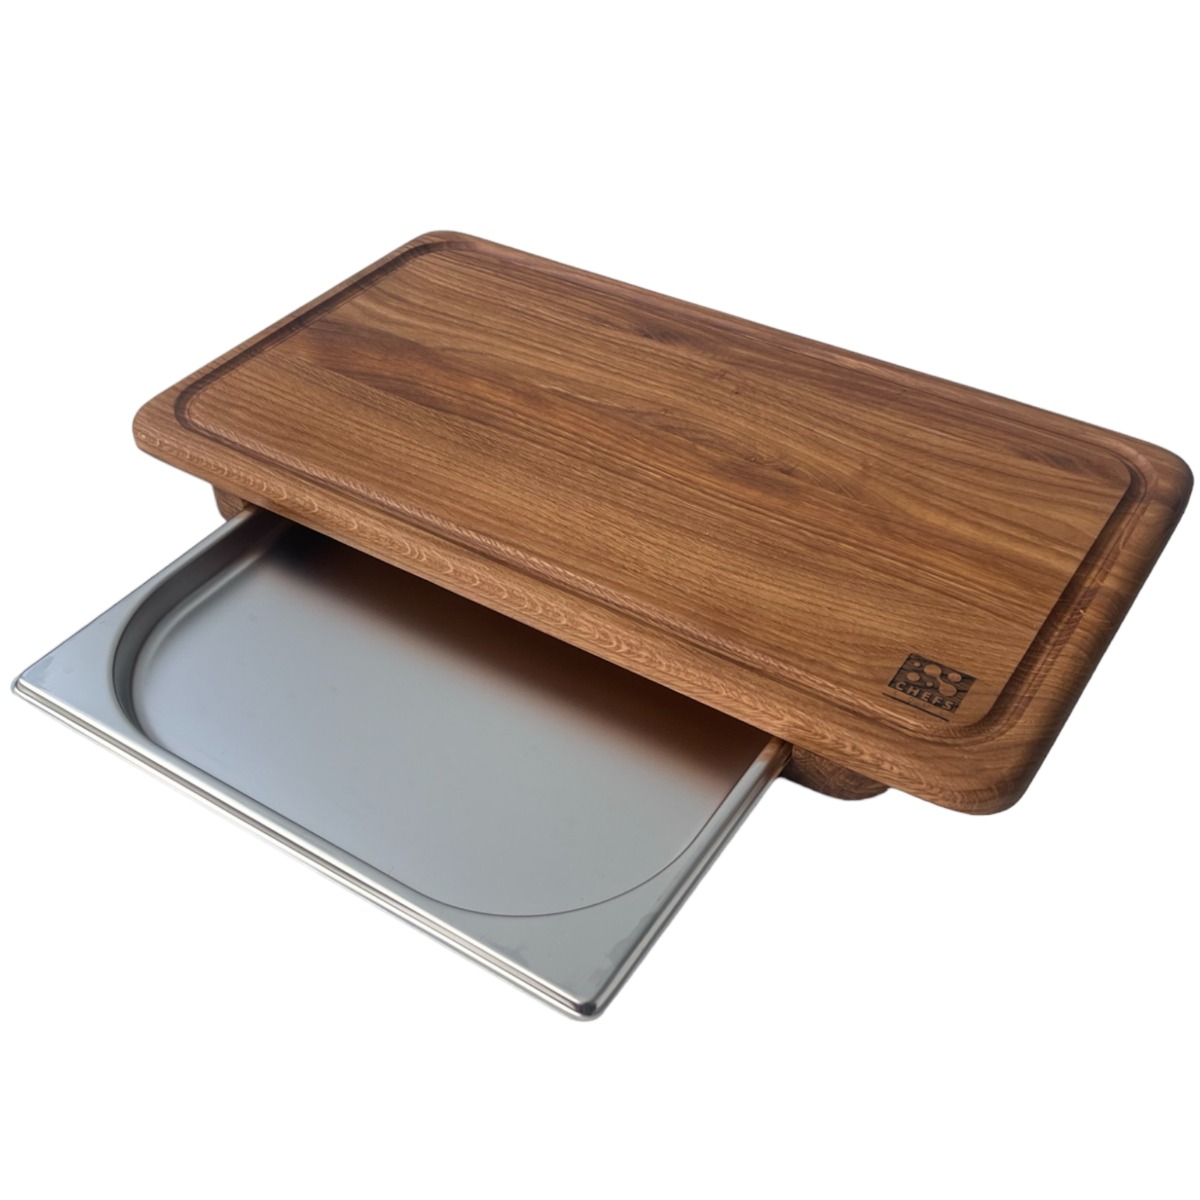 Wooden Cutting Board 51x28 cm with tray, Numi – Chef’s Soul®